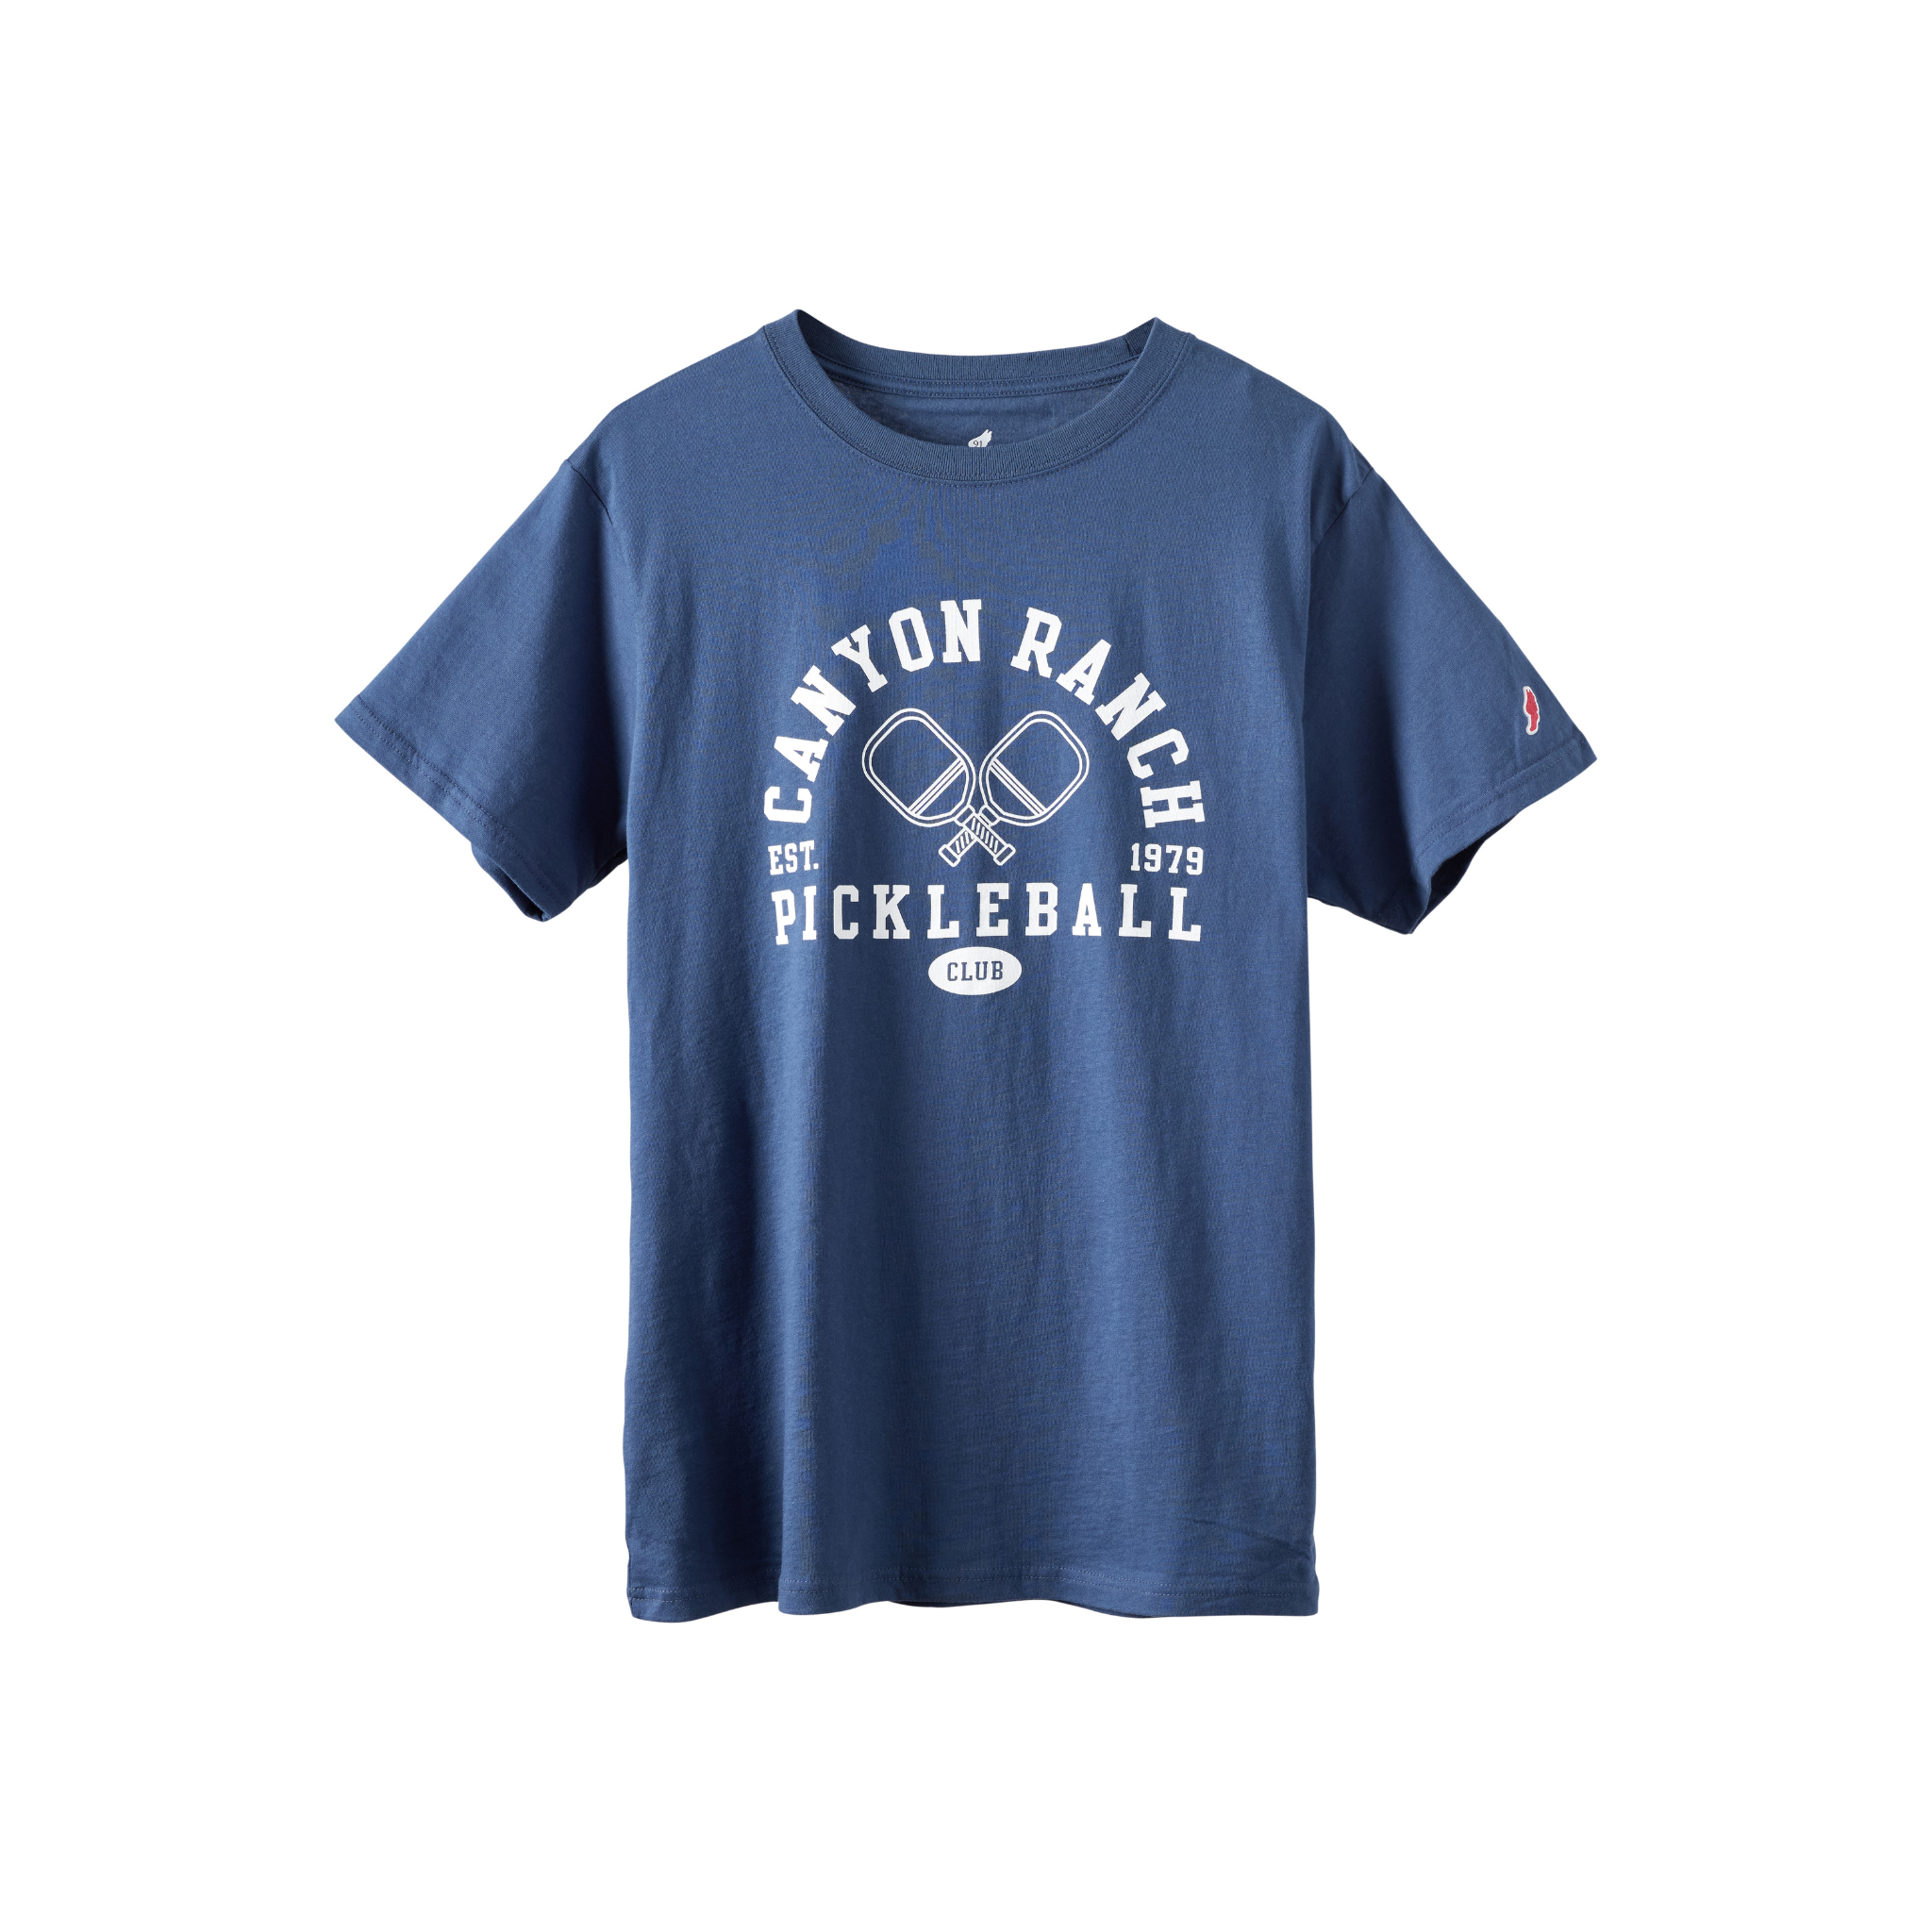 Canyon Ranch All American Pickleball Tee Navy / White